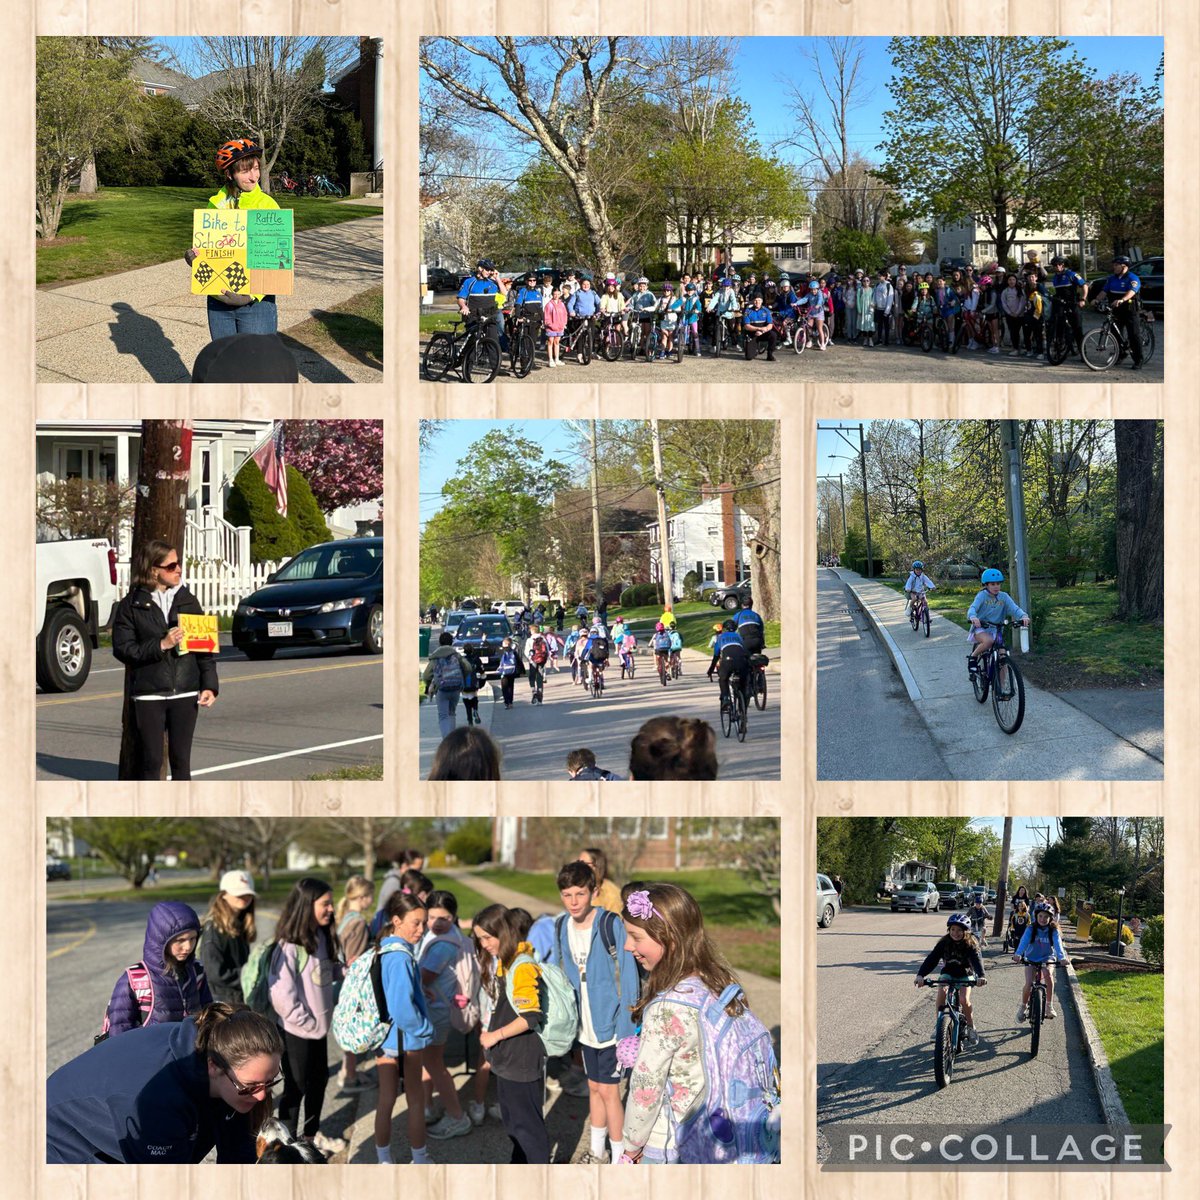 What a perfect day for #beproudbedale’s walk/bike to school event! Thank you to the Ss & Ts who participated, the parent volunteers, @MedfieldPolice, & @JeffreyJMarsden who supported this great initiative. #ridewalktoschool #medfieldclimateweek #medfieldps #kidsdeserveit 🚲